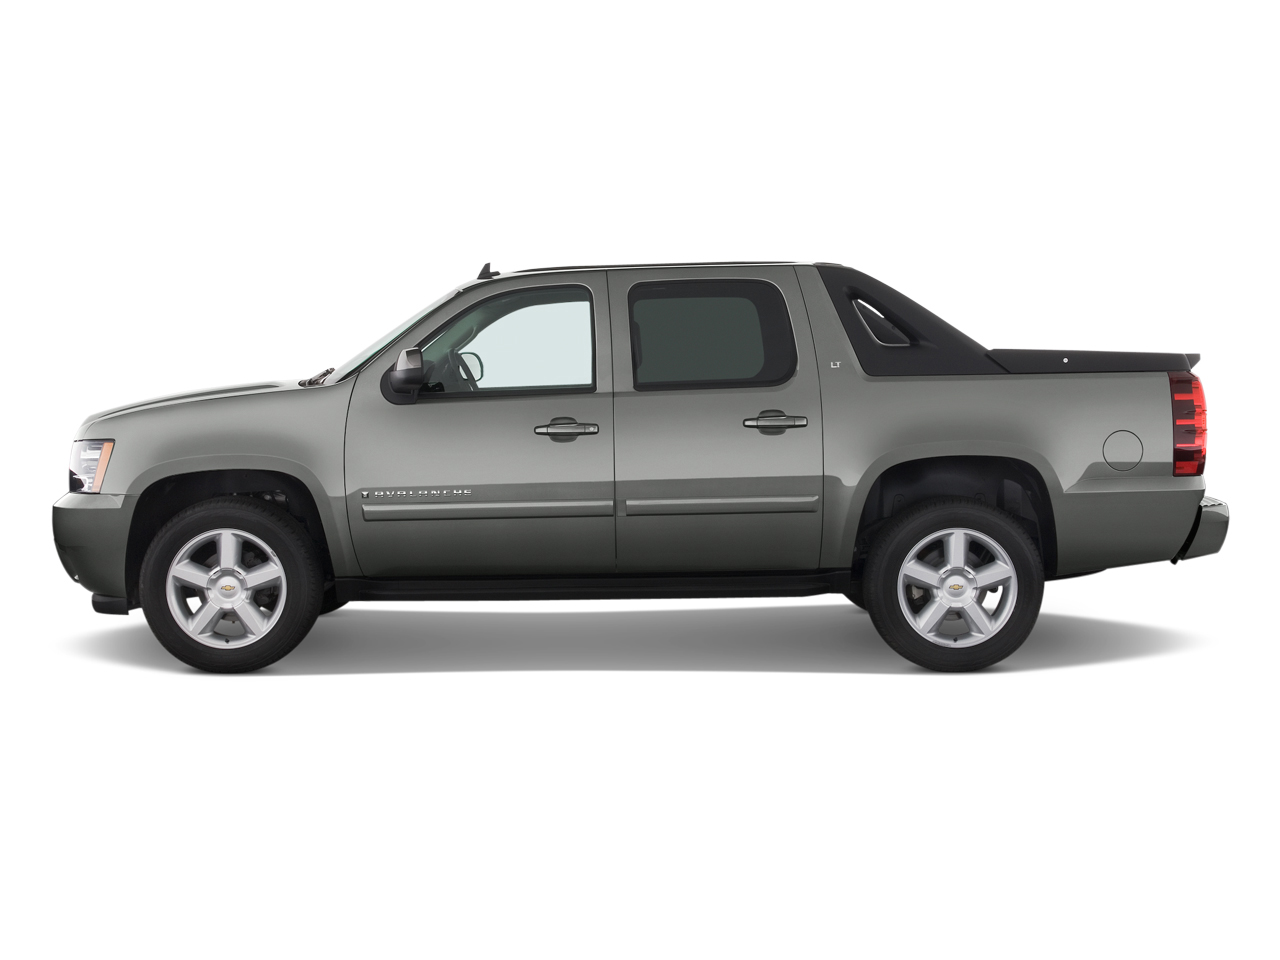 2011 Chevrolet Avalanche (Chevy) Review, Ratings, Specs, Prices, and Photos  - The Car Connection